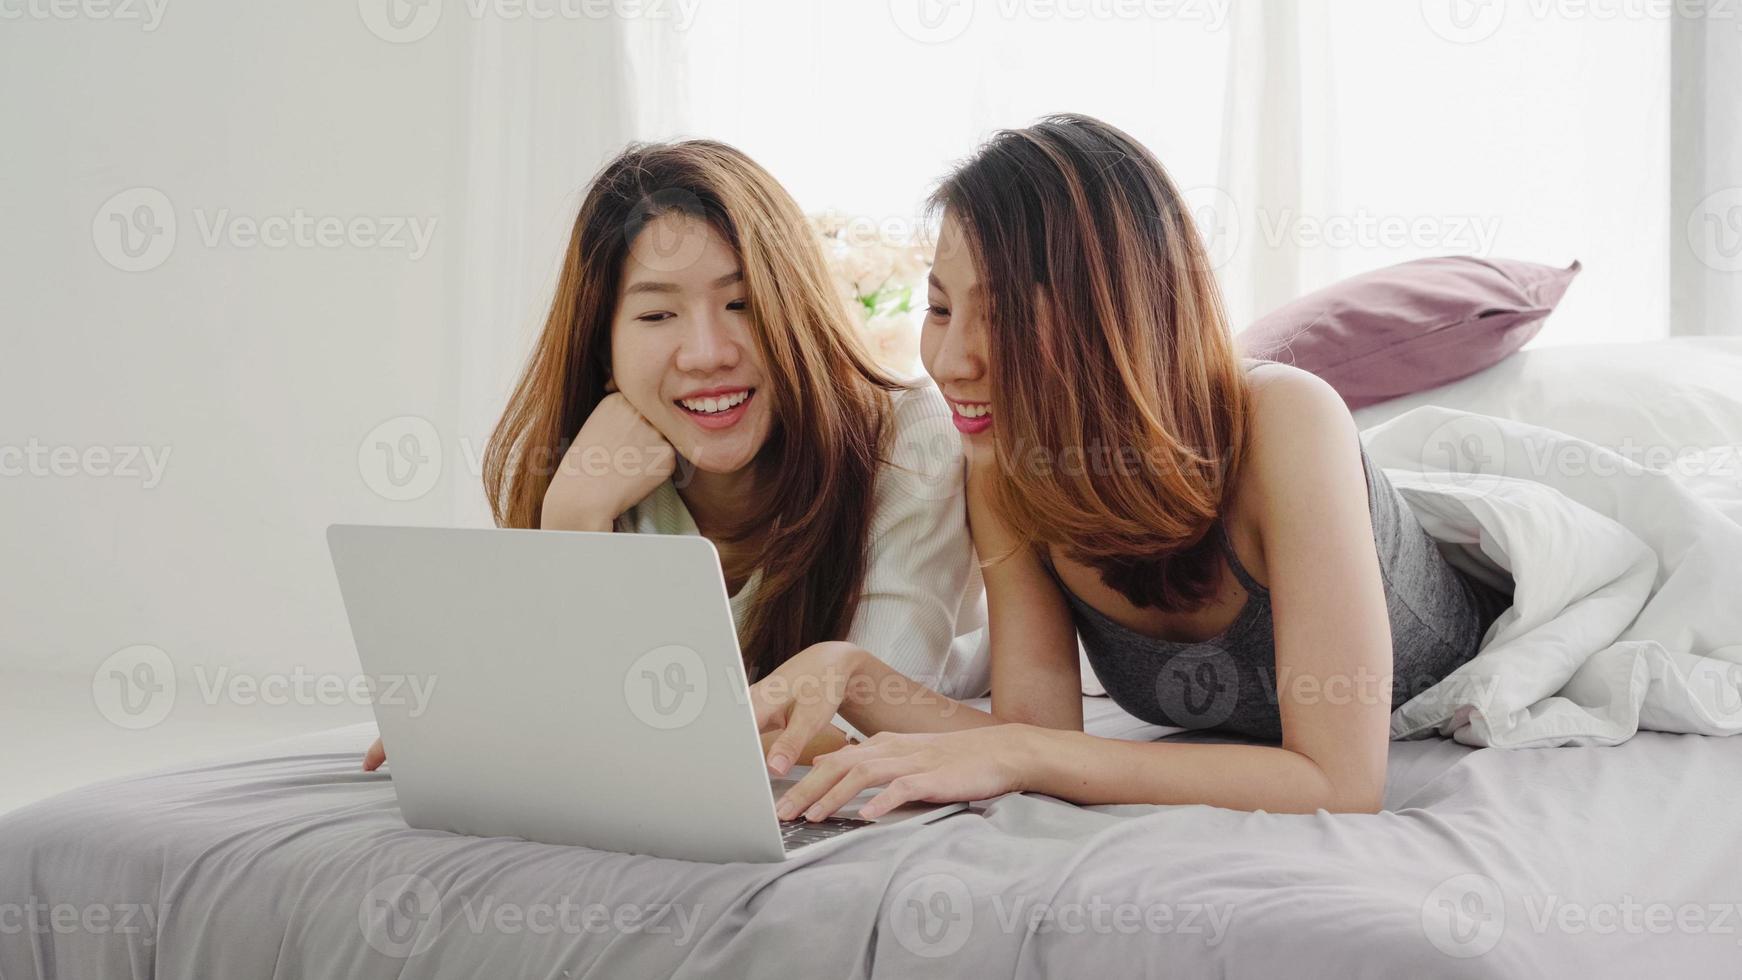 Beautiful young asian women LGBT lesbian happy couple sitting on bed hug and using laptop computer together bedroom at home. LGBT lesbian couple together indoors concept. Spending nice time at home. photo